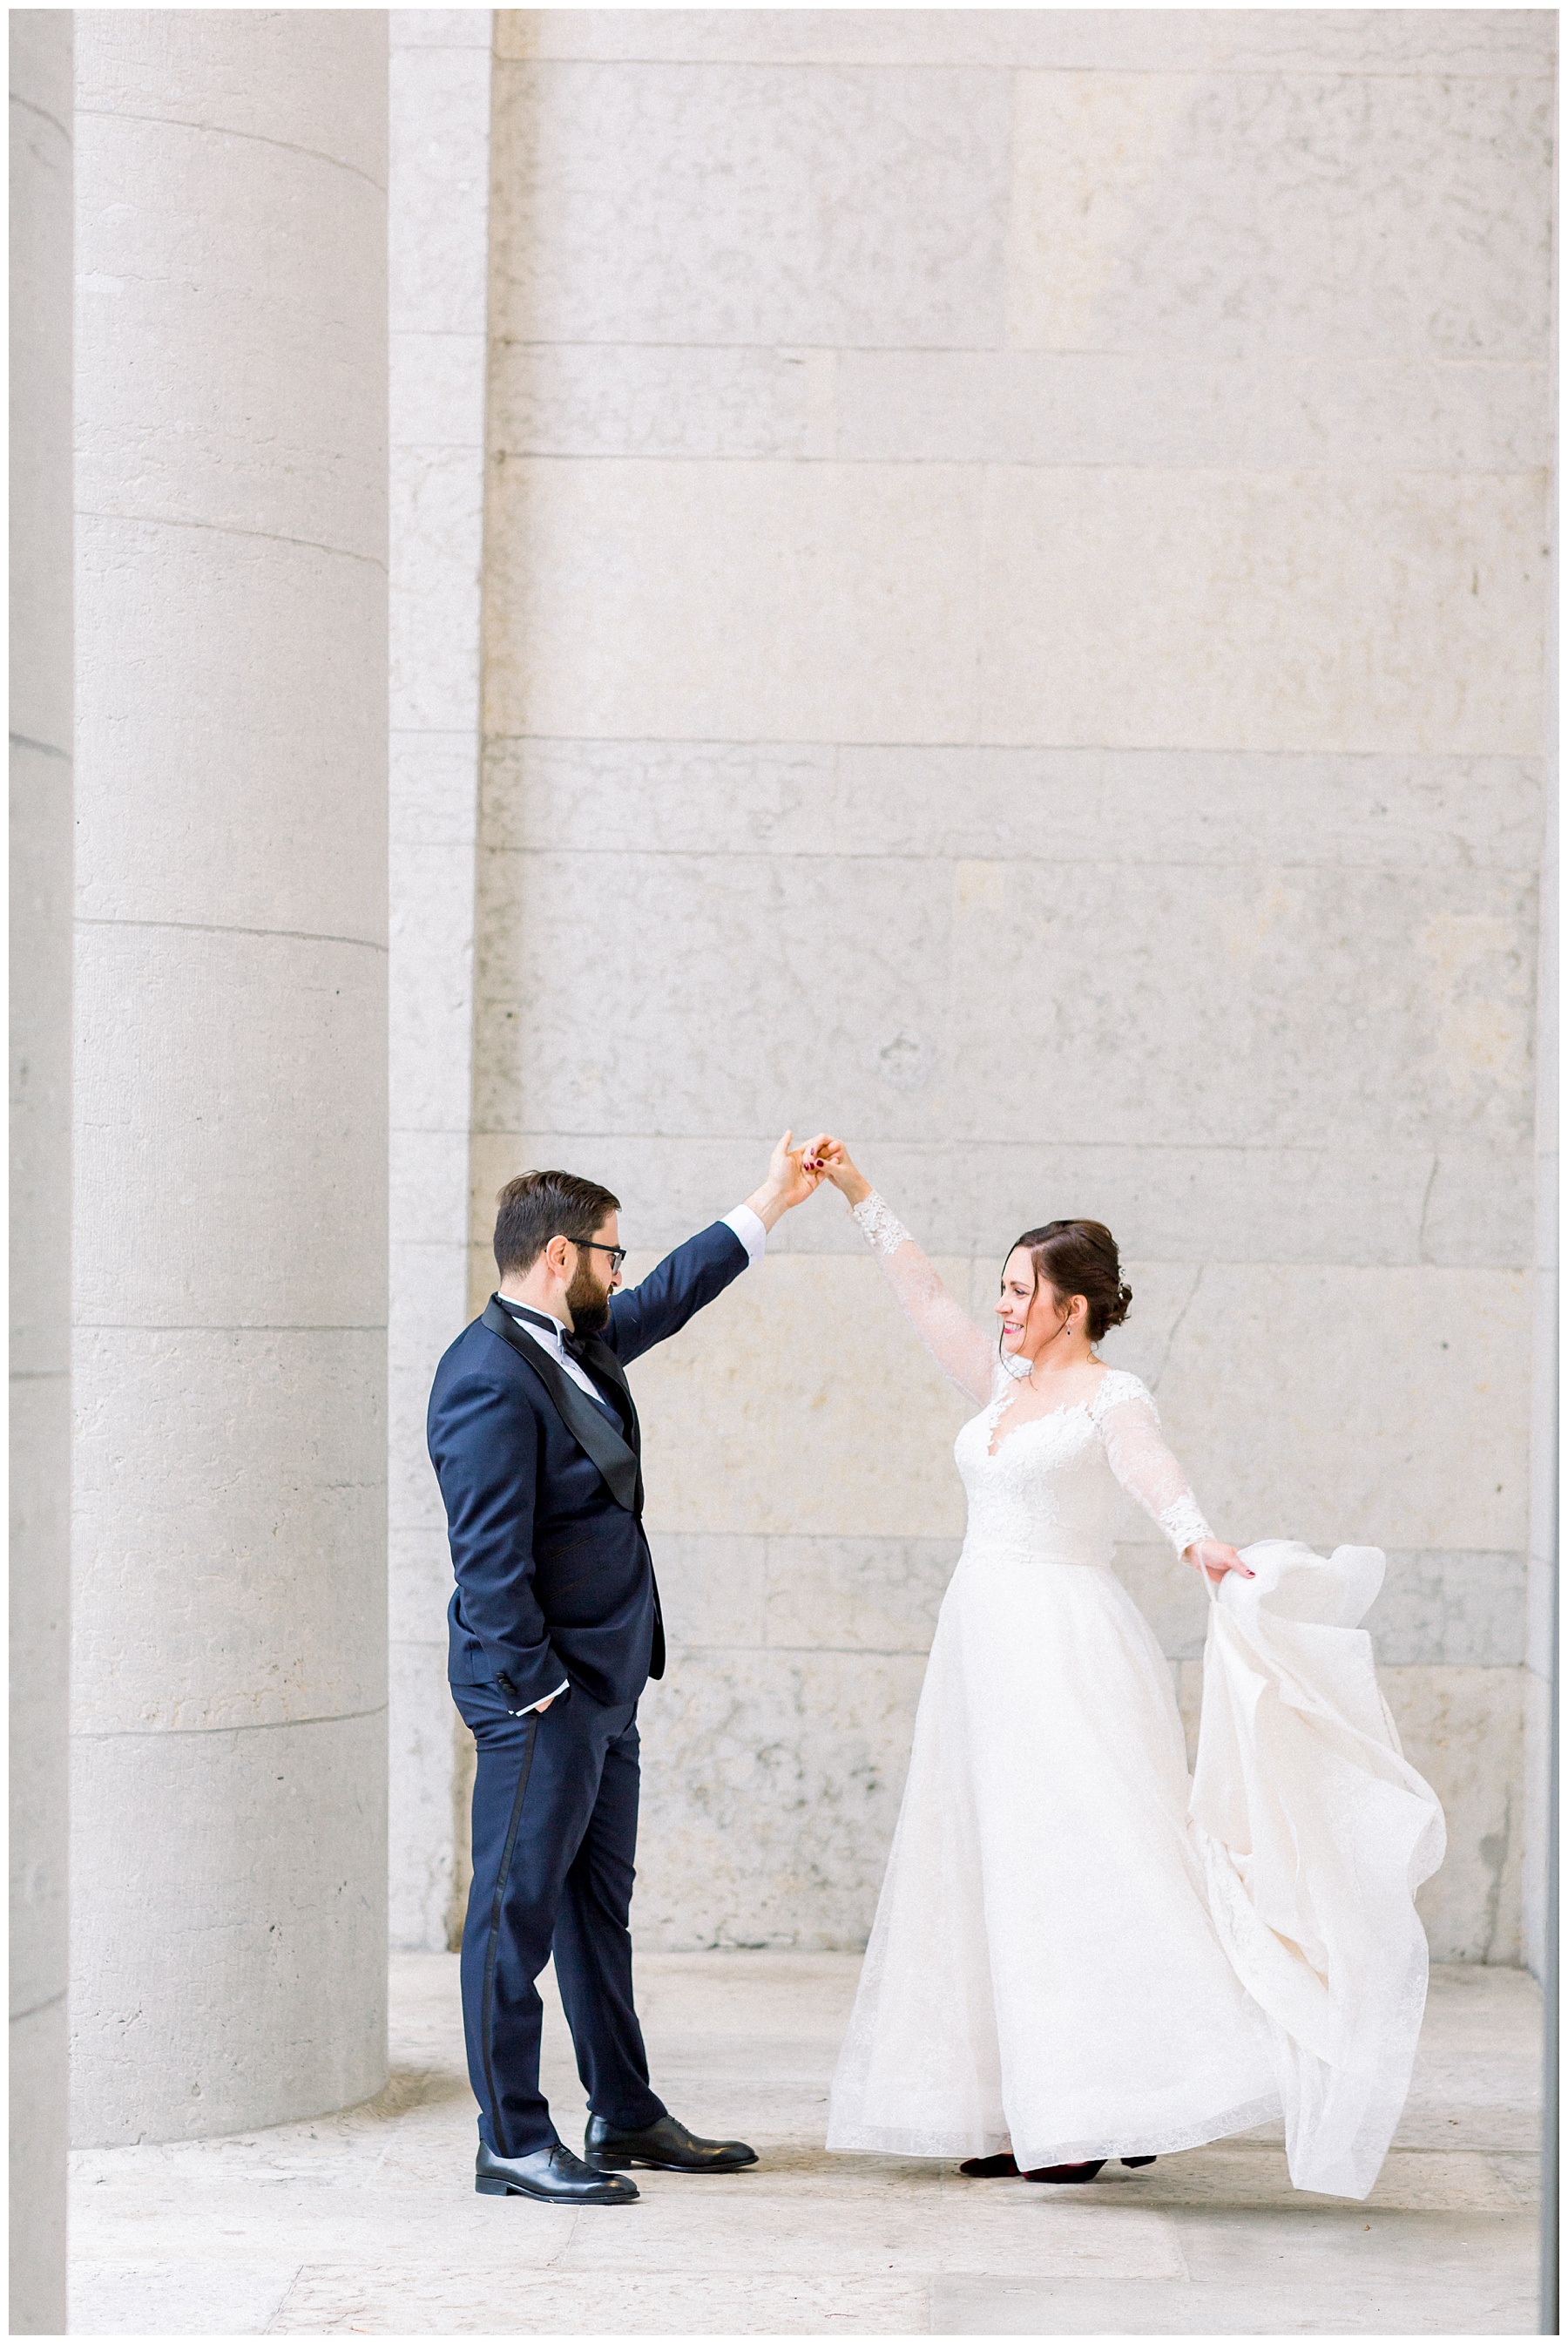 Halloween Wedding at the Boat House at Confluence Park in Columbus Ohio. Ohio Statehouse Bride and Groom Portraits